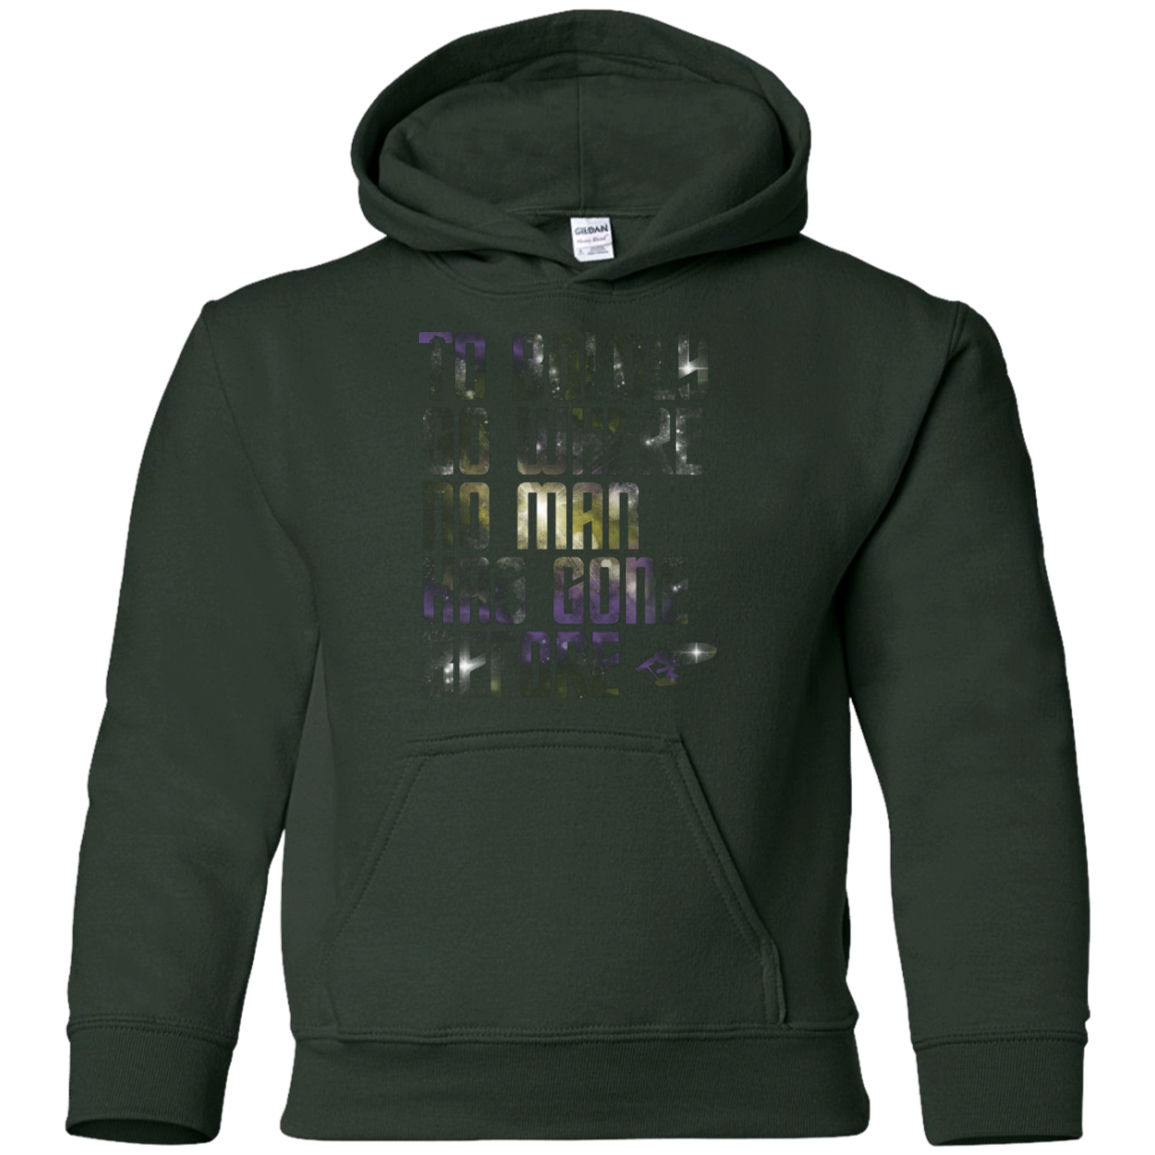 Where no Man has gone Before Youth Hoodie